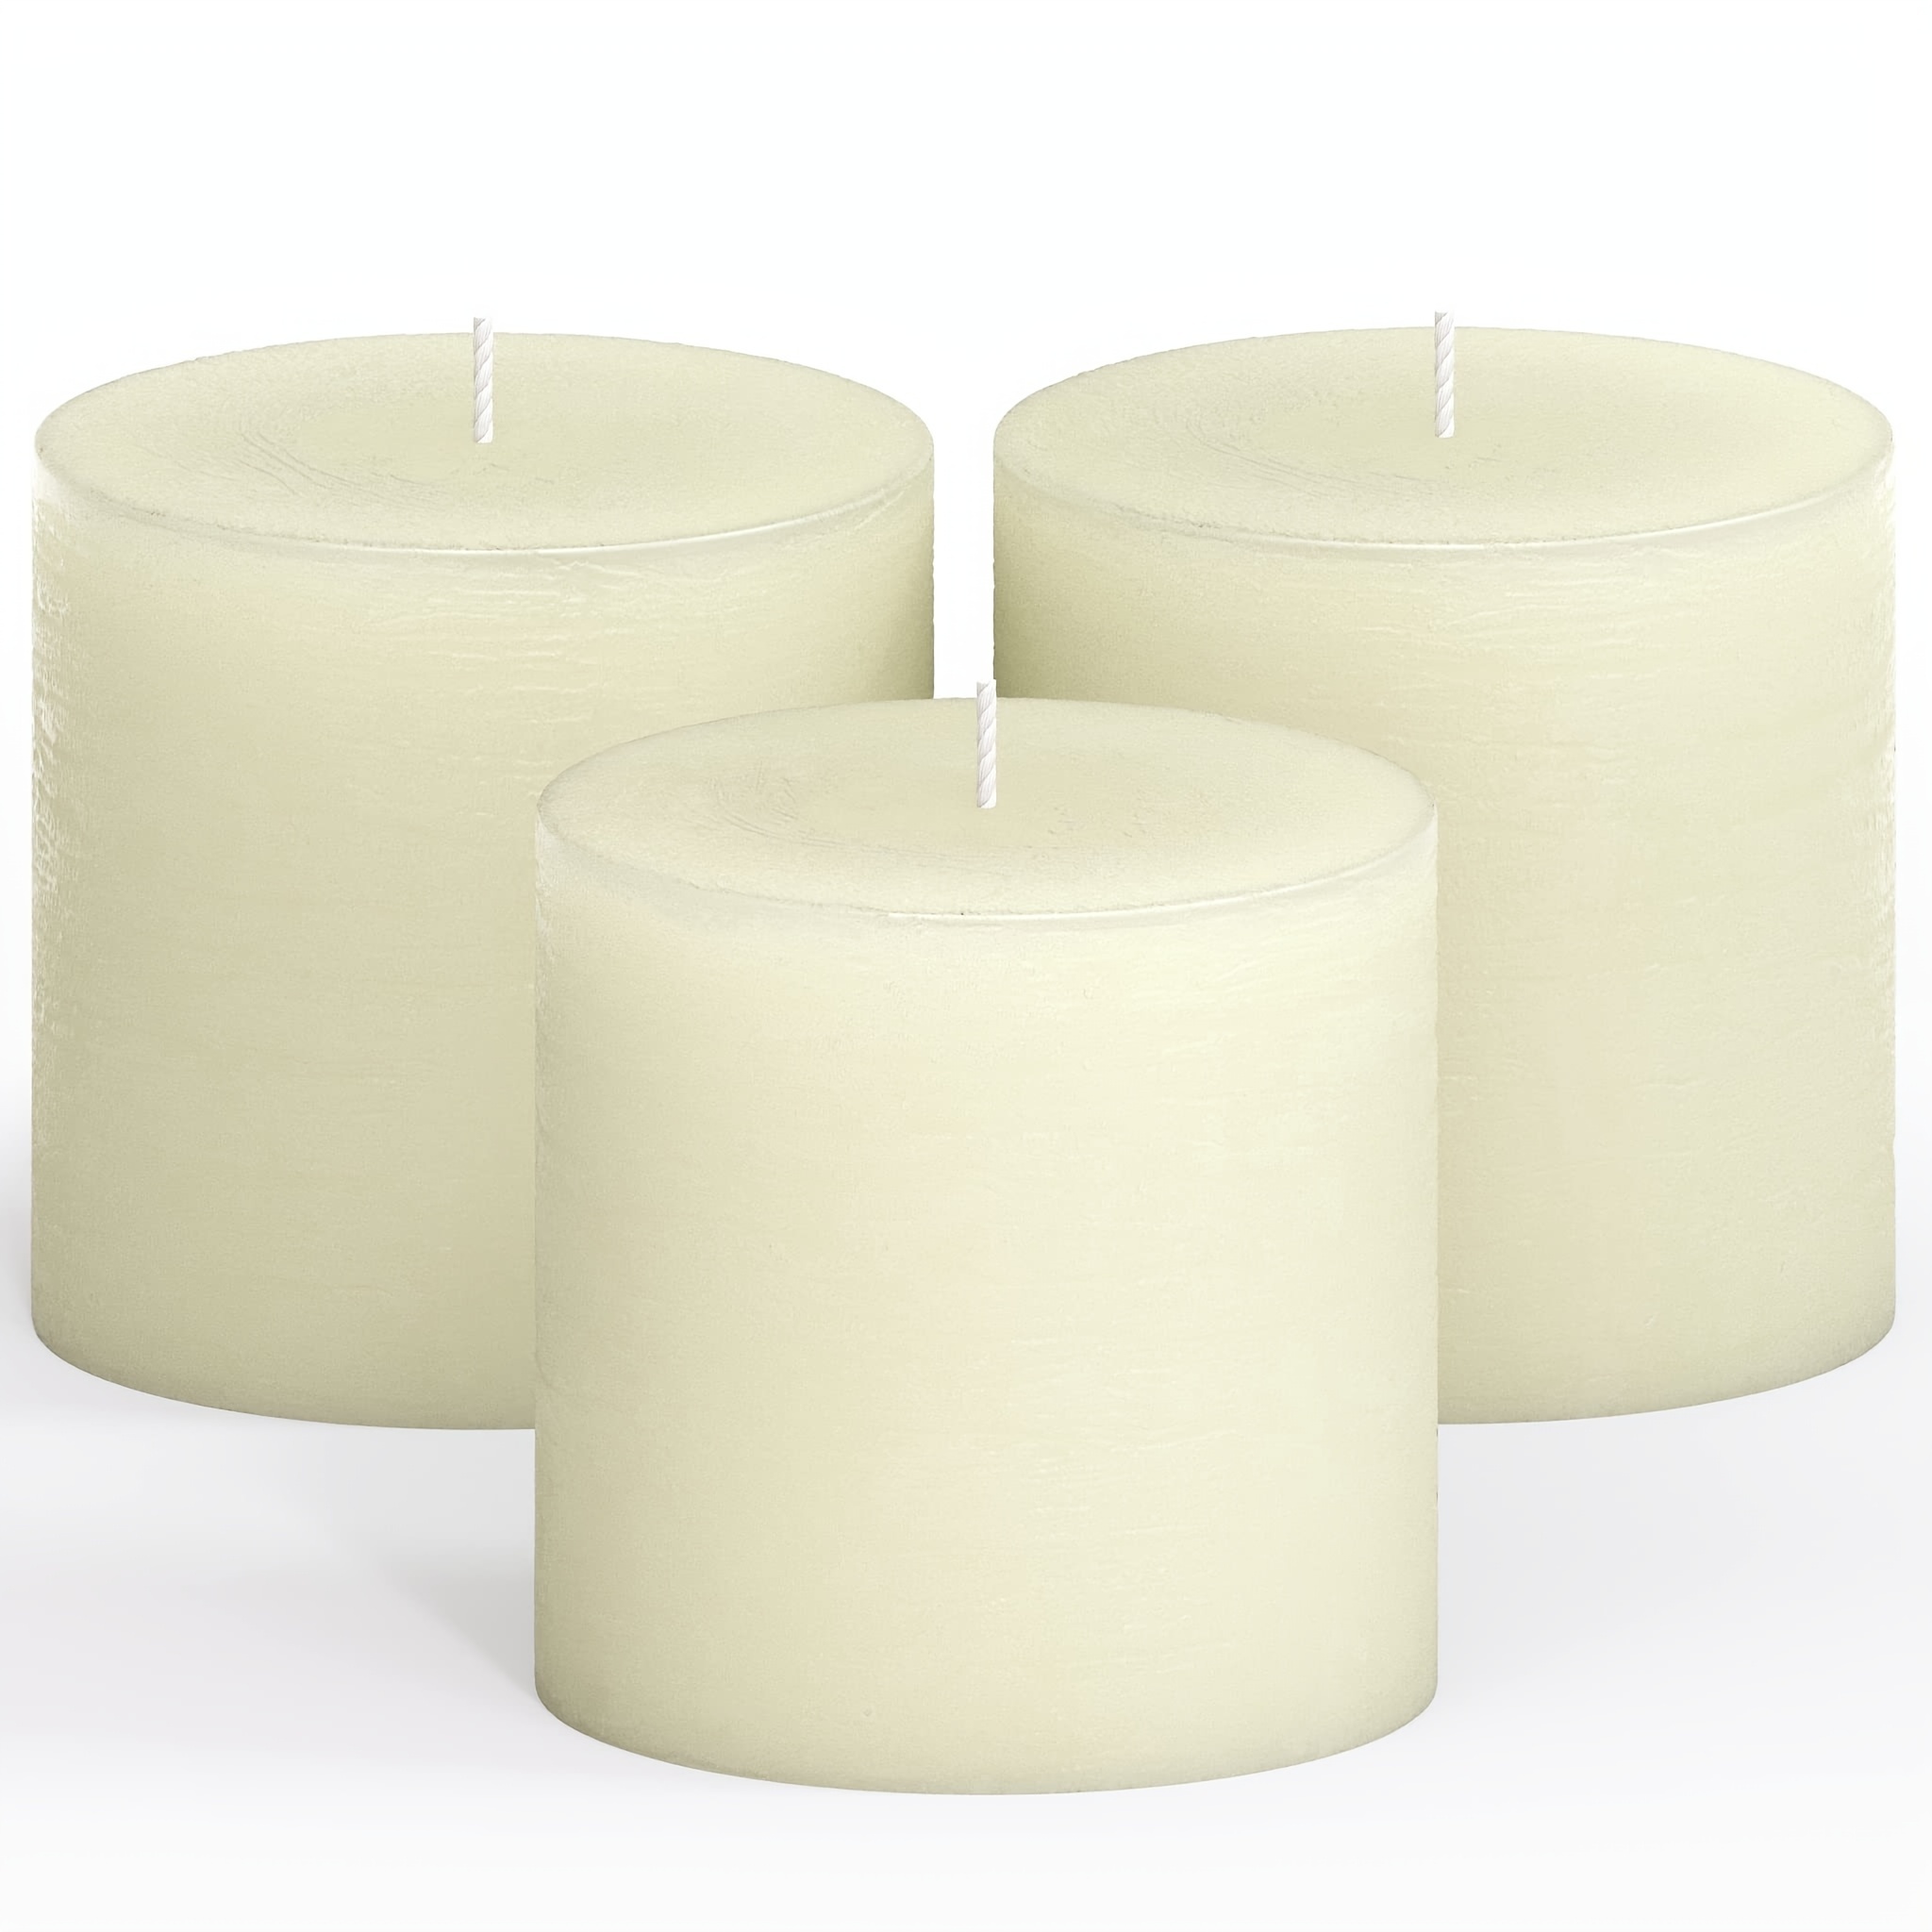 

3 Pcs 2x2 Inch White Unscented Pillar Candles - Smokeless, Rustic Texture, 36 Hours Burn Time - Perfect For Weddings, Home Decor, Restaurants, Spa, Church